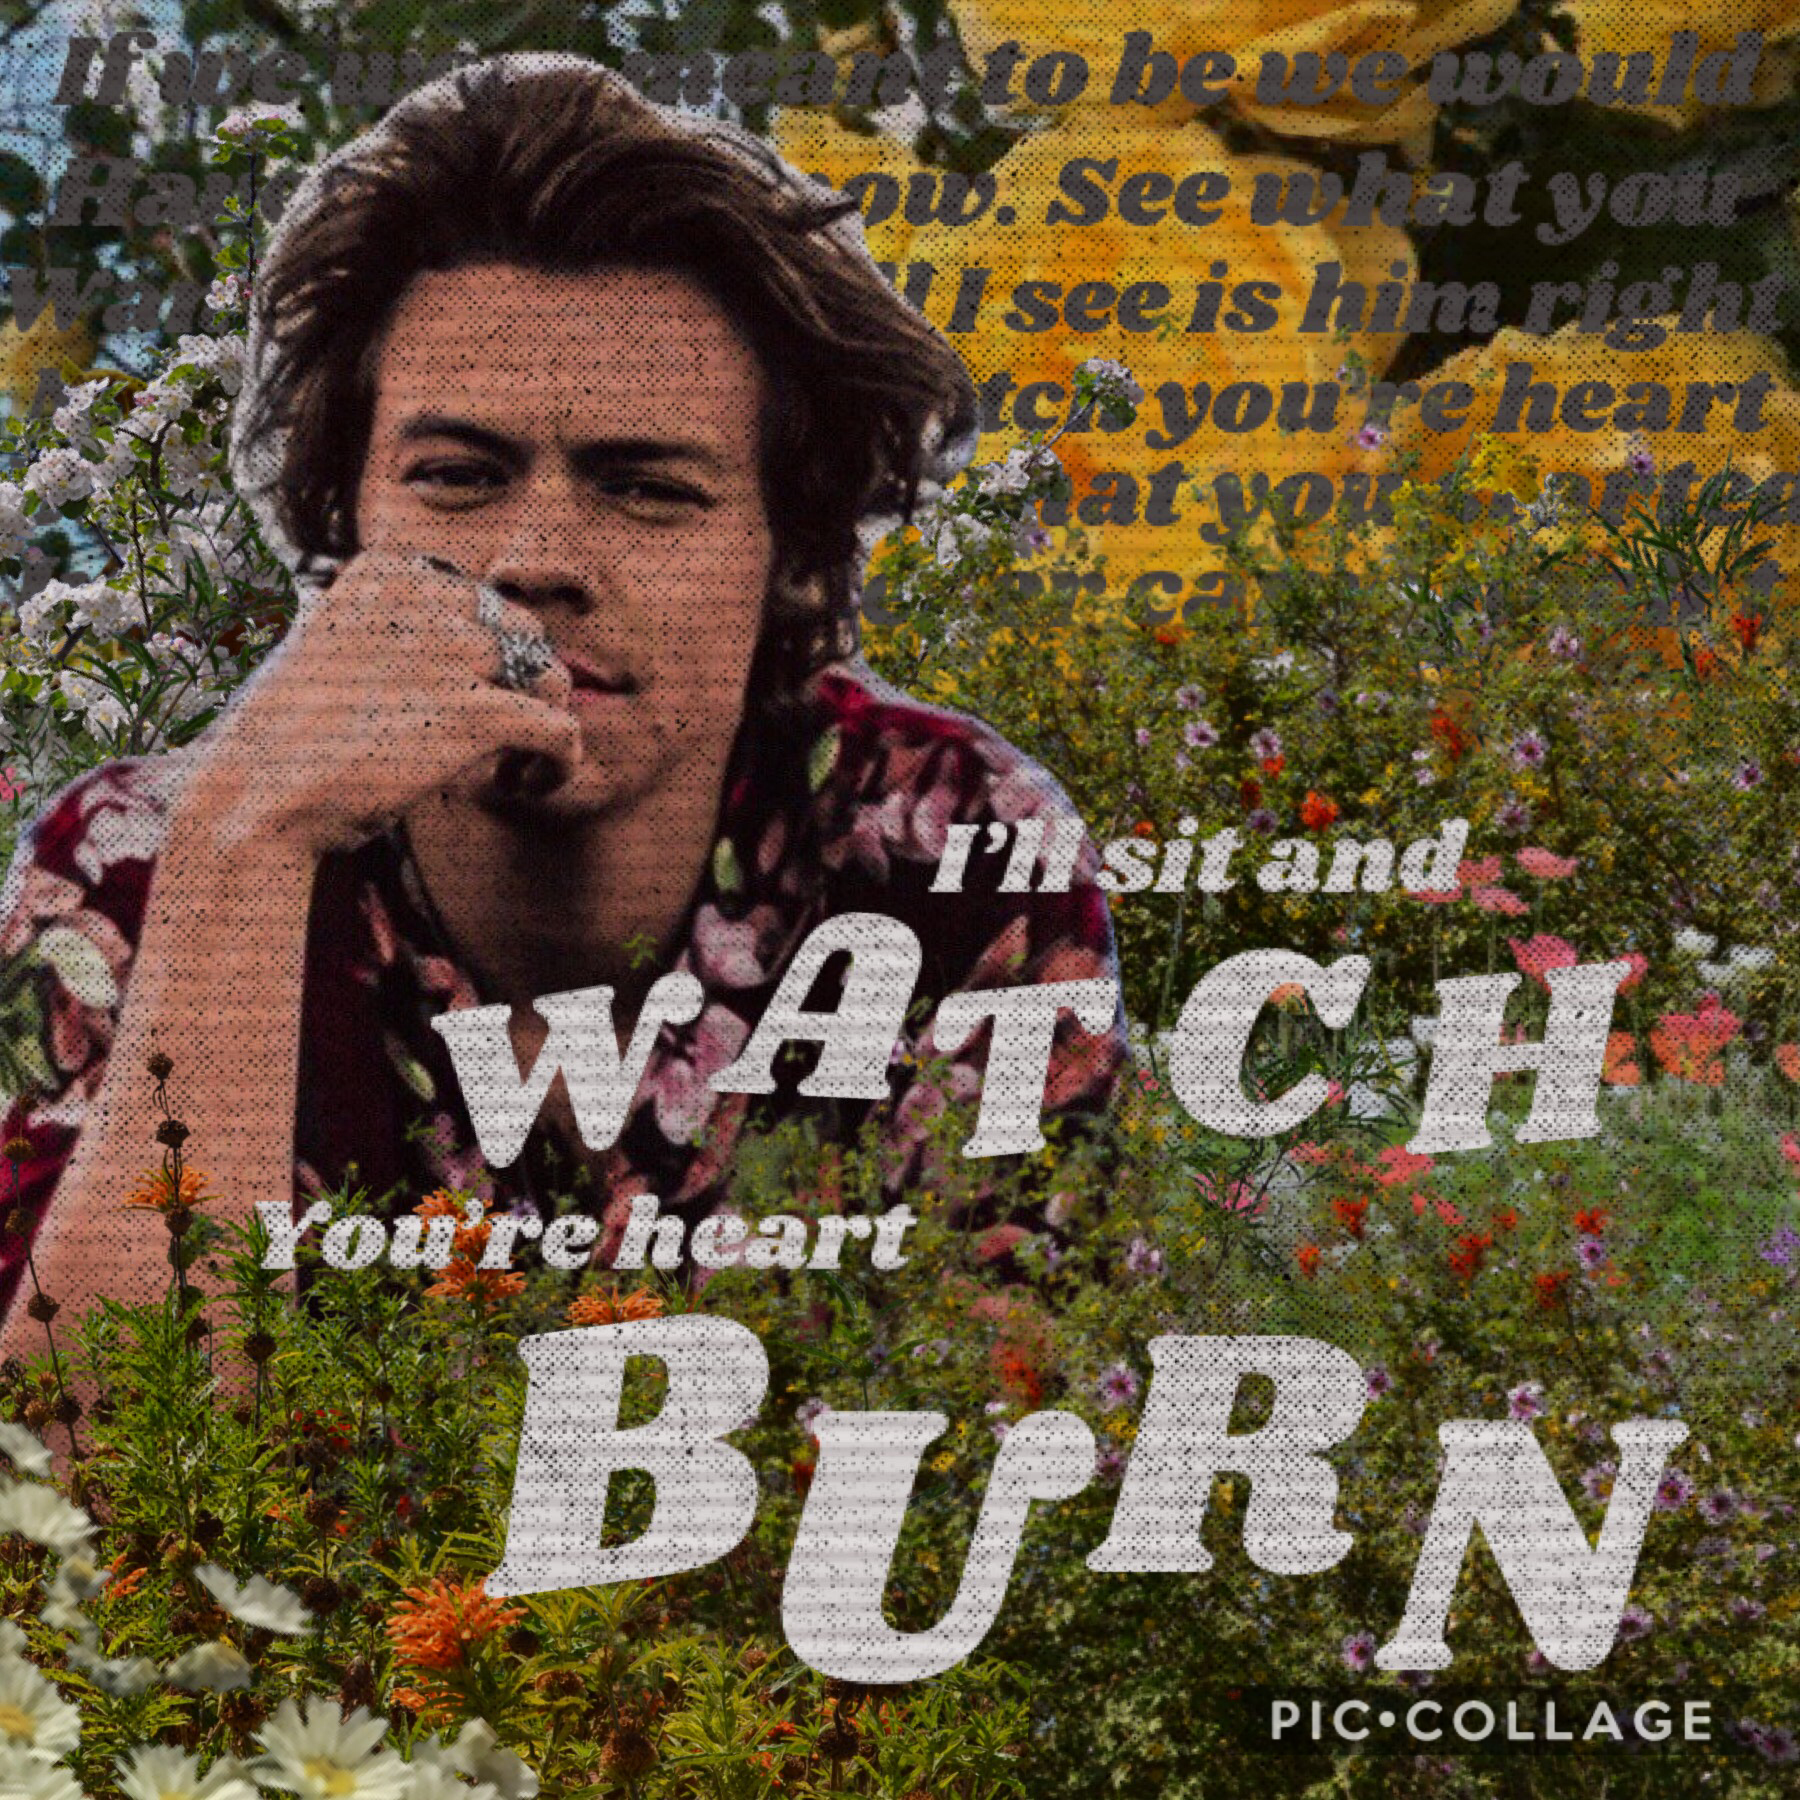 I know my last collage was this same theme with the same pngs but you know, I don’t care. This is a pretty cool collage if I do say so myself. 
Also, Harry in Italy was a blessing so that’s why I made this. 
And yes, I know that I put billie Eilish lyrics